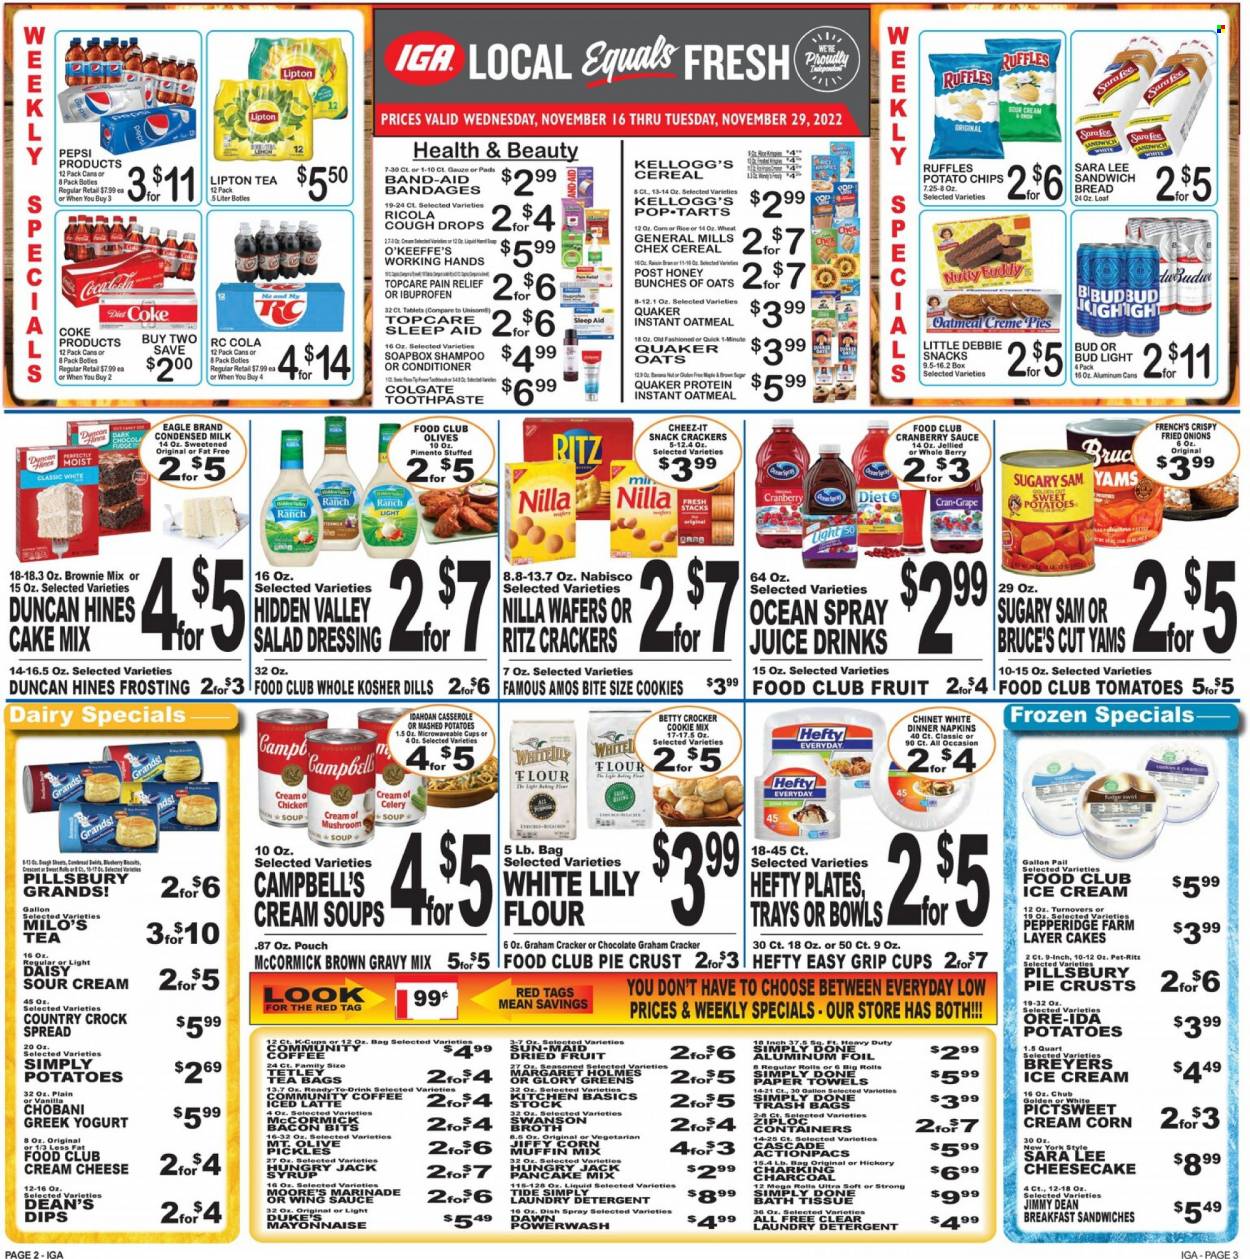 thumbnail - IGA Flyer - 11/16/2022 - 11/29/2022 - Sales products - bread, Sara Lee, turnovers, brownie mix, cake mix, muffin mix, corn, sweet potato, tomatoes, Campbell's, celery soup, mashed potatoes, mushroom soup, soup, sauce, pancakes, Pillsbury, Quaker, Jimmy Dean, bacon bits, greek yoghurt, yoghurt, Chobani, milk, condensed milk, sour cream, mayonnaise, ice cream, Ore-Ida, ricola, wafers, snack, crackers, Kellogg's, Pop-Tarts, RITZ, potato chips, Cheez-It, Ruffles, flour, frosting, pie crust, oatmeal, broth, pickles, olives, cereals, gravy mix, salad dressing, dressing, marinade, wing sauce, cranberry sauce, syrup, Coca-Cola, Pepsi, Lipton, Diet Coke, Cran-Grape, Milo's, tea bags, coffee, beer, Bud Light, napkins, bath tissue, kitchen towels, paper towels, detergent, Tide, laundry detergent, shampoo, Colgate, toothpaste, conditioner, Hefty, trash bags, plate, casserole, cup, aluminium foil, pain relief, Unisom, Ibuprofen, cough drops. Page 2.